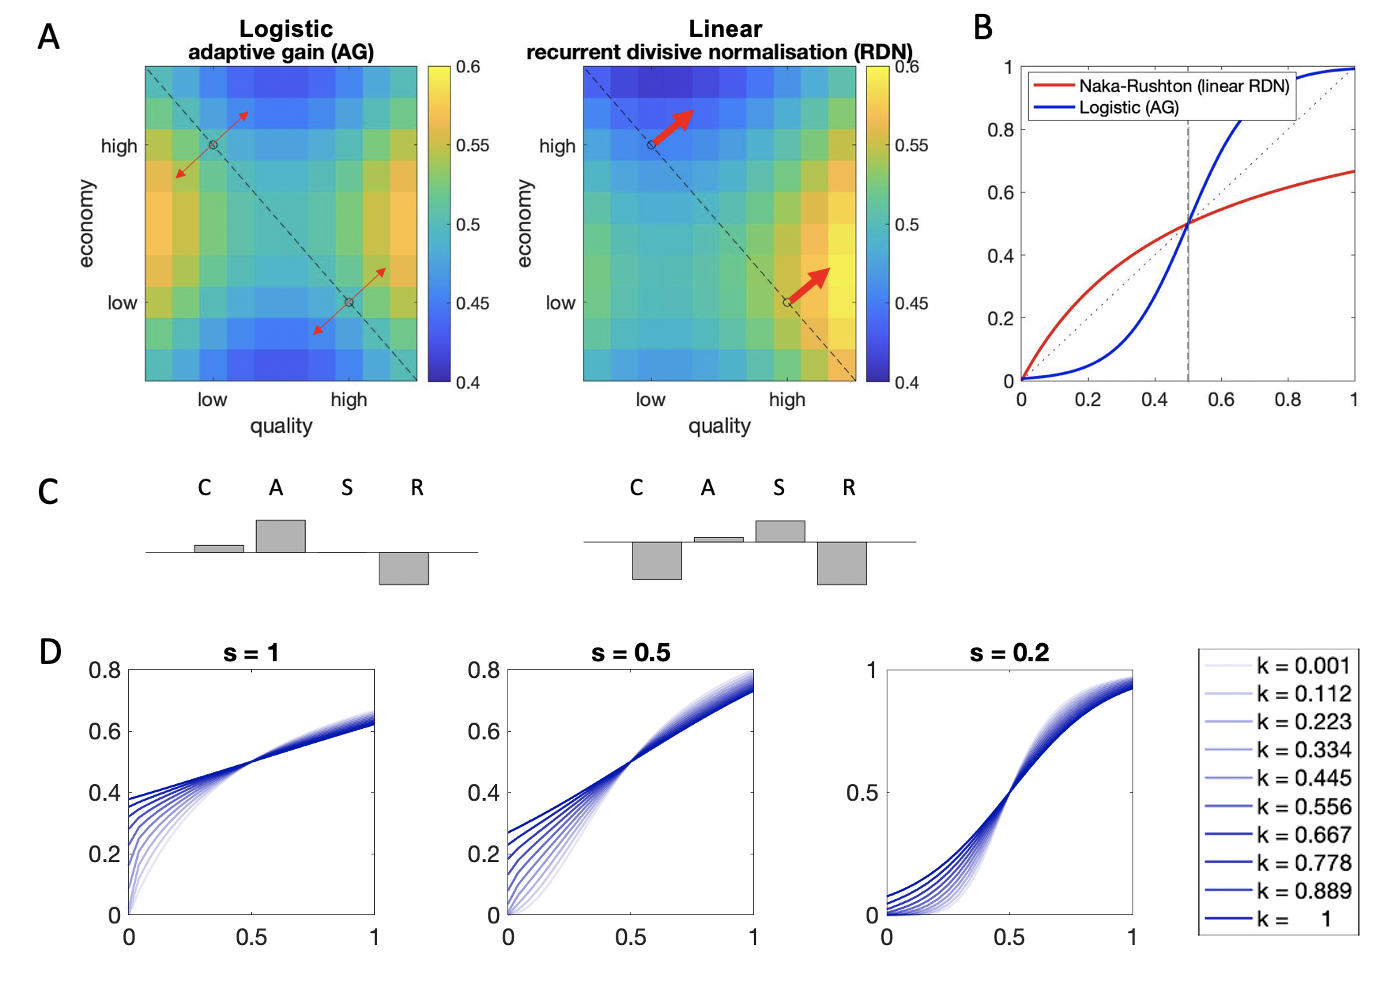 The role of the compressive nonlinearity. $\textbf{A:}$ Simulated decoy maps for the adaptive gain and recurrent divisive normalization models. It is noteworthy that the adaptive gain model (with bias terms $c_i=c_j=0$) produces symmetric regions of repulsion and attraction around the line of isopreference. By contrast, "linear" recurrent divisive normalization (i.e. RDN without a power transform applied to values prior to transduction) produces stronger repulsion and attraction for superior decoys (i.e. decoys above rather than below the isopreference line). $\textbf{B:}$ The asymmetric pattern of decoy influence seen for linear RDN occurs because the transducer is a (decelerating) Naka-Rushton function. This function is concave, meaning that the derivative is always higher (i.e. curve steeper) for low than high attribute values irrespective of the value of $x$. By contrast, the transducer for AG is sigmoidal and it is thus symmetric around the midpoint (which is itself adjusted to the context; this is the “adaptive” part). This panel plots the transductions applied to inputs by the Naka-Rushton function in red and by the Sigmoidal function in blue, with $v((avg)_i)=0.5$ (dashed line), $s=0.1$. The recurrent divisive normalization framework (without additional nonlinearity) implies that those attribute values which are always relatively smaller (closer to zero) are processed with higher gain. By contrast, the adaptive gain model implies that resources are allocated preferentially to the mean of a context, exaggerating binary distinctions which potentially straddle that midpoint (e.g. “low” vs. “high” value). $\textbf{C:}$ The relative strengths of the compromise, attraction, similarity and repulsion effects per the two decoy maps. $\textbf{D:}$ Illustration of the transfer function of the grandmother model, with $c_i=c_j=0$, $\beta_1=\beta_2=1$, and $v((avg)_i)=0.5$, across different values of $k$ and $s$. Note that with this parametrization, the transducer function is equivalent to a logistic function when $k=1$, and to a Naka-Rushton function when $k \sim 0$ and $s=1$. Power transforming inputs (by setting $s \neq 1$) in the Naka-Rushton definition approximates the sigmoidal shape of the adaptive gain transducer.